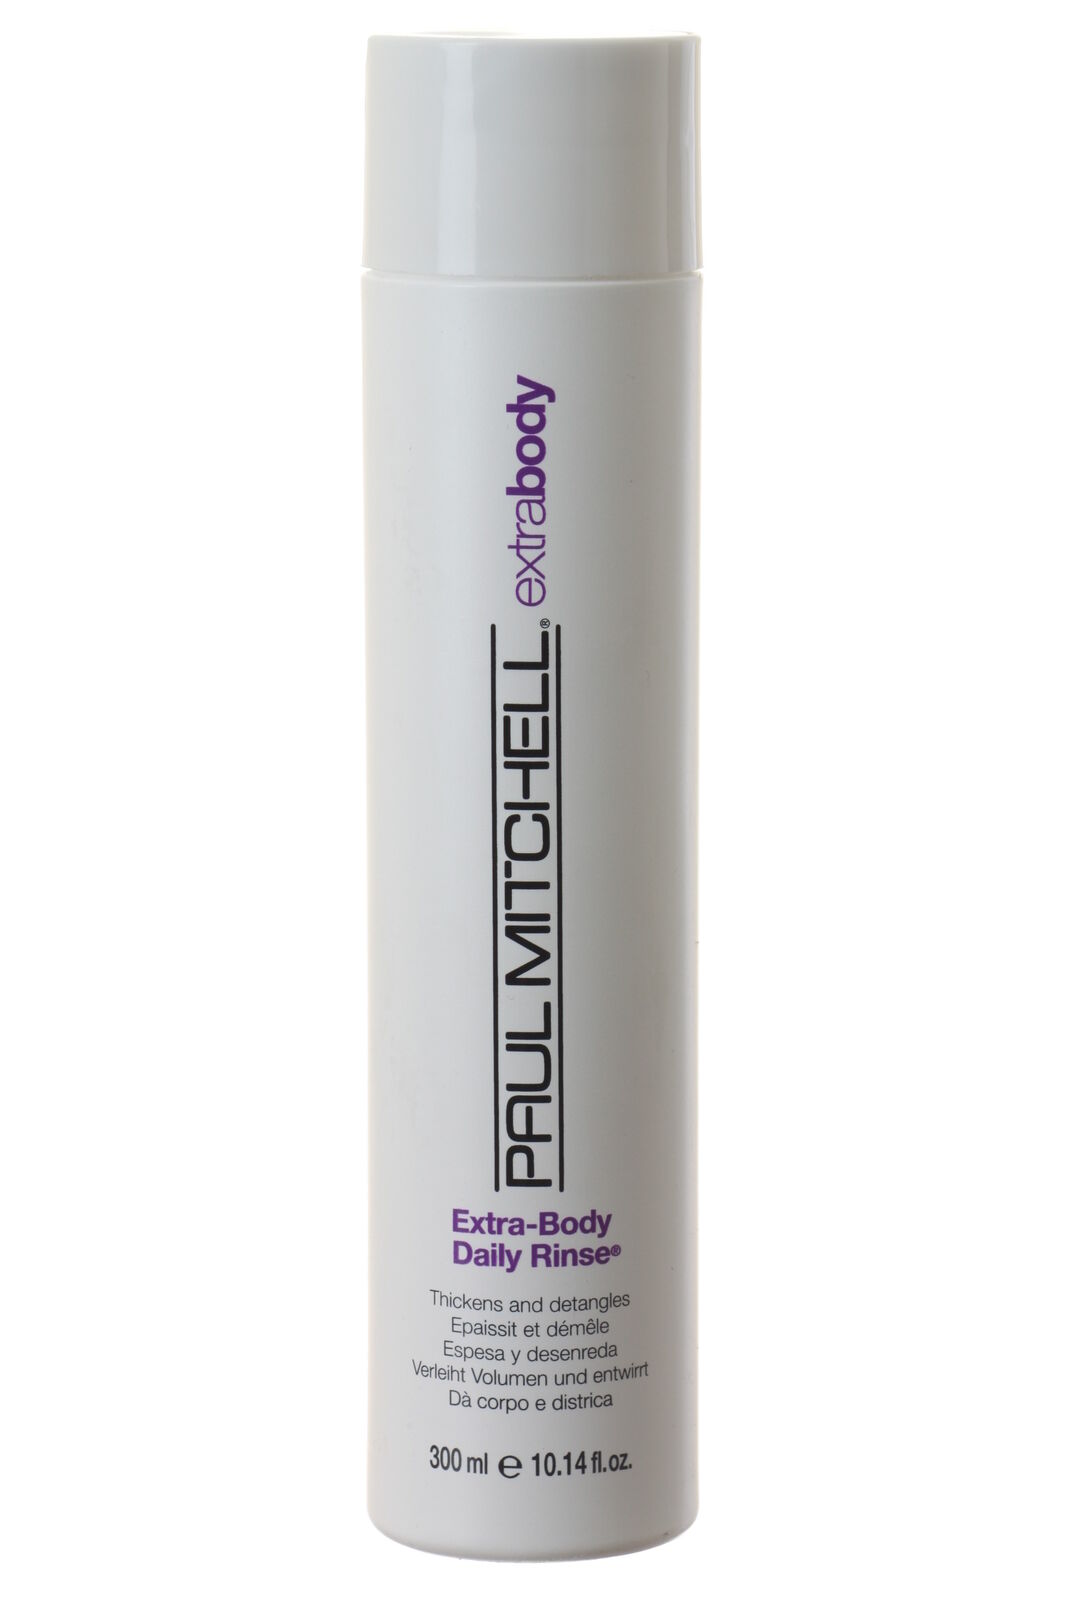 Paul Mitchell Extra Body Daily Rinse Conditioner 10.14 oz.